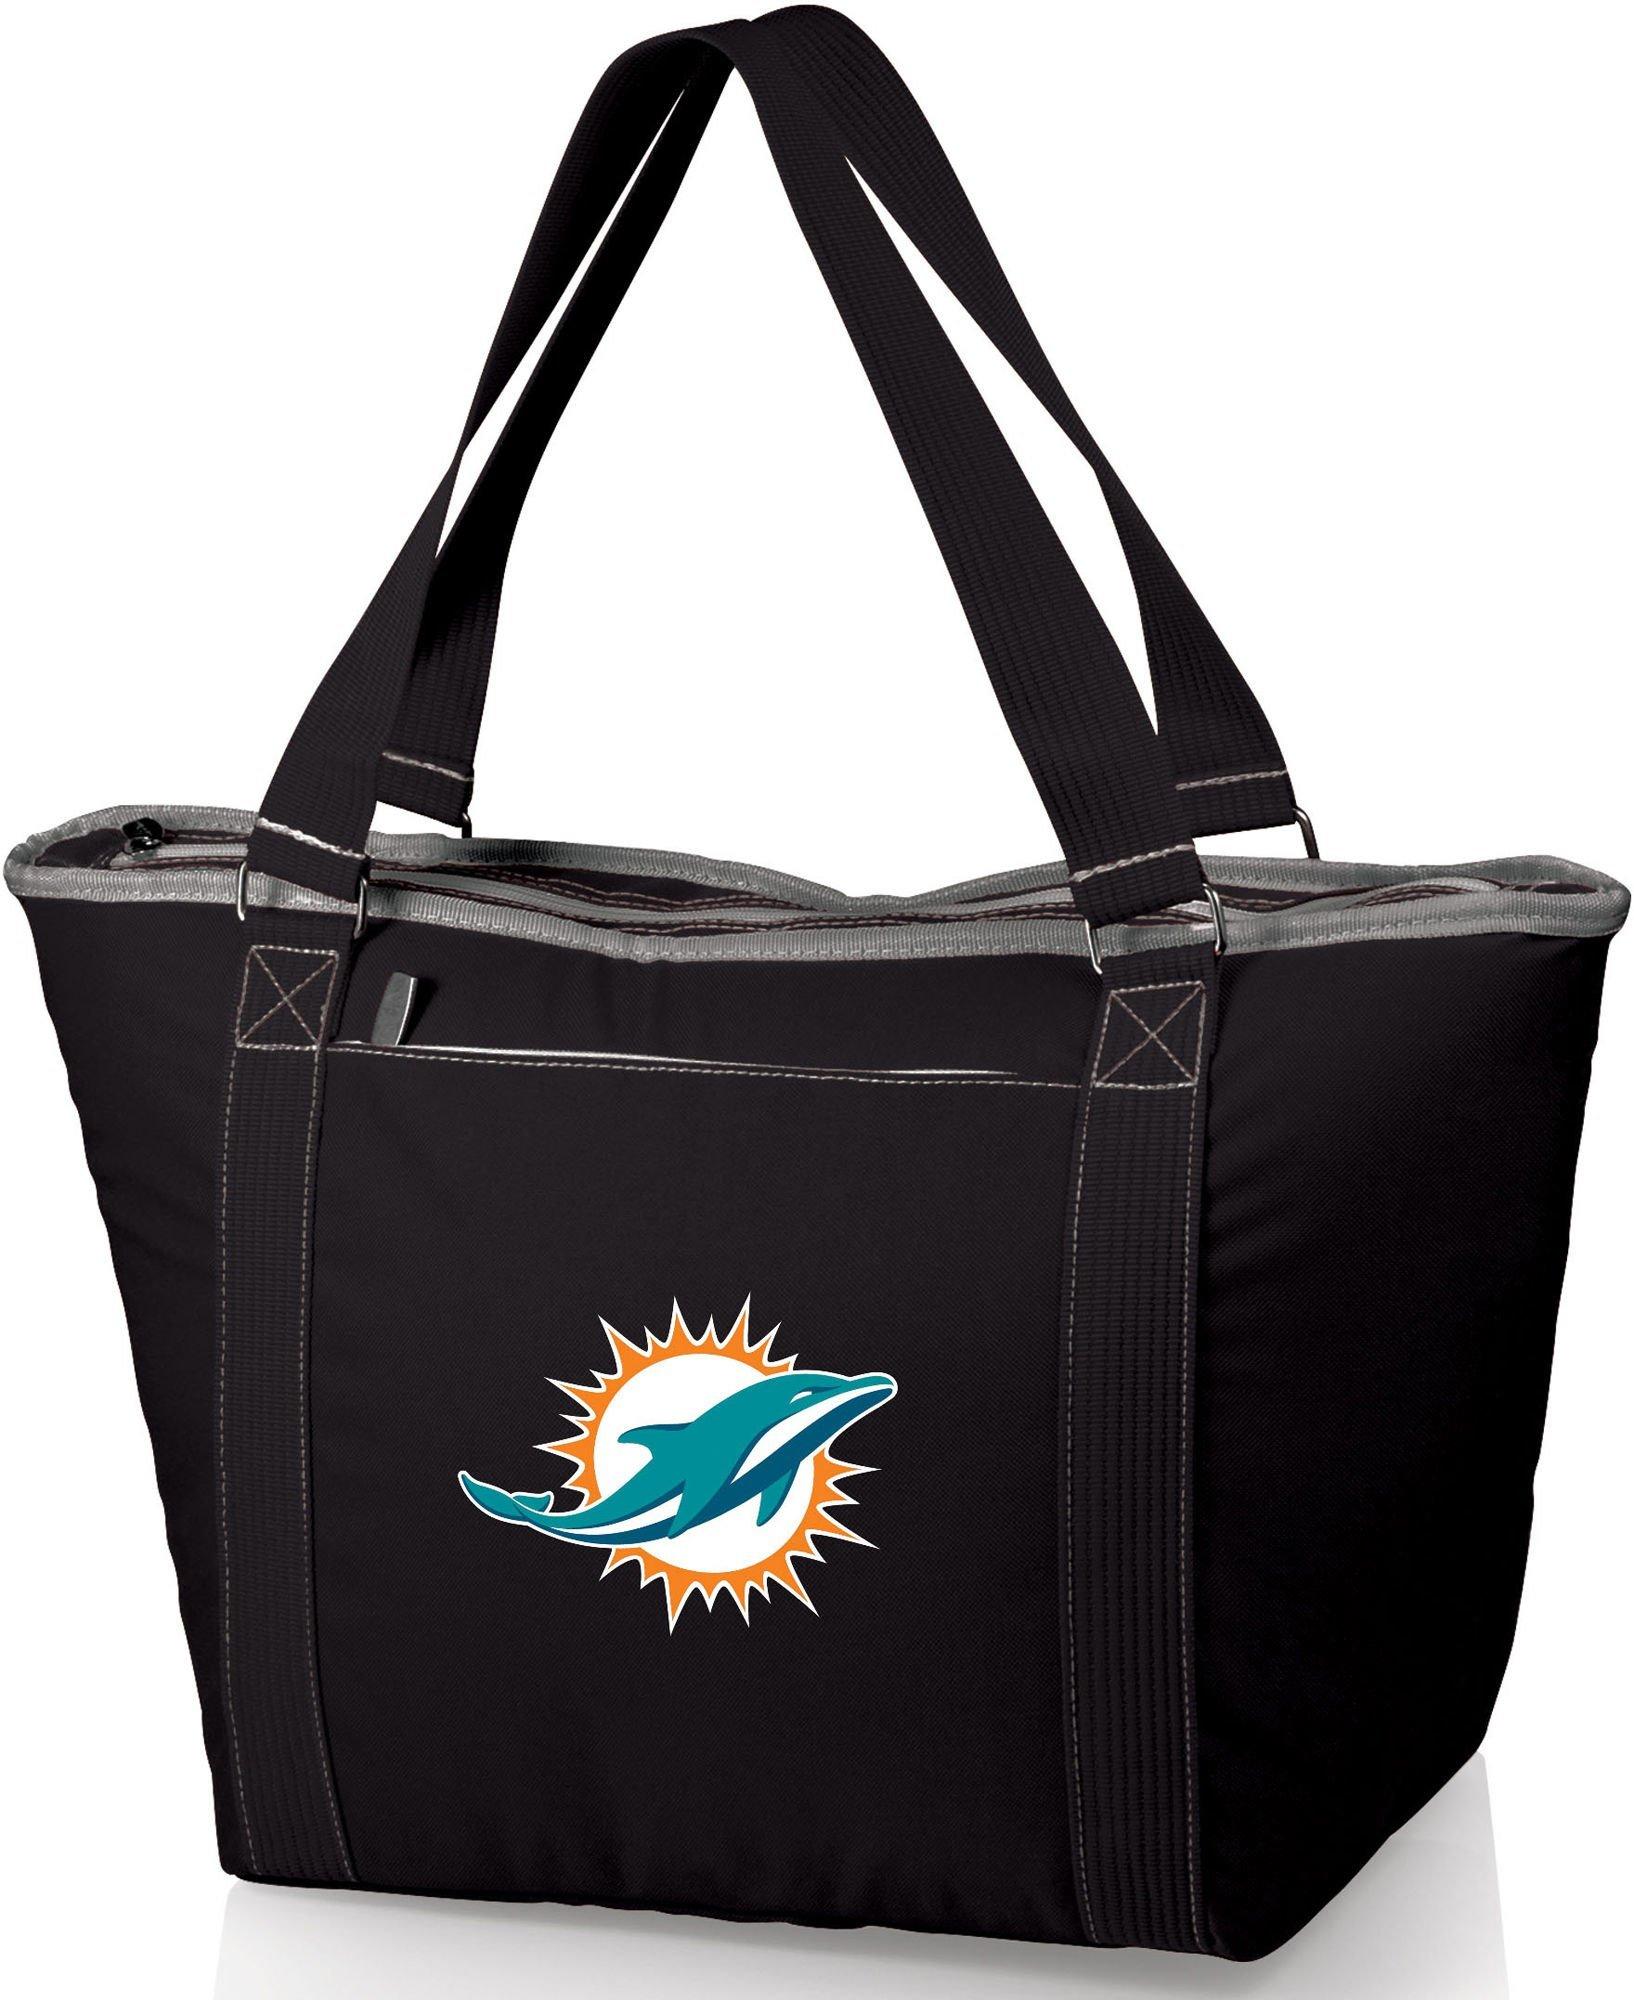 Miami Dolphins Topanga Cooler Tote by Picnic Time